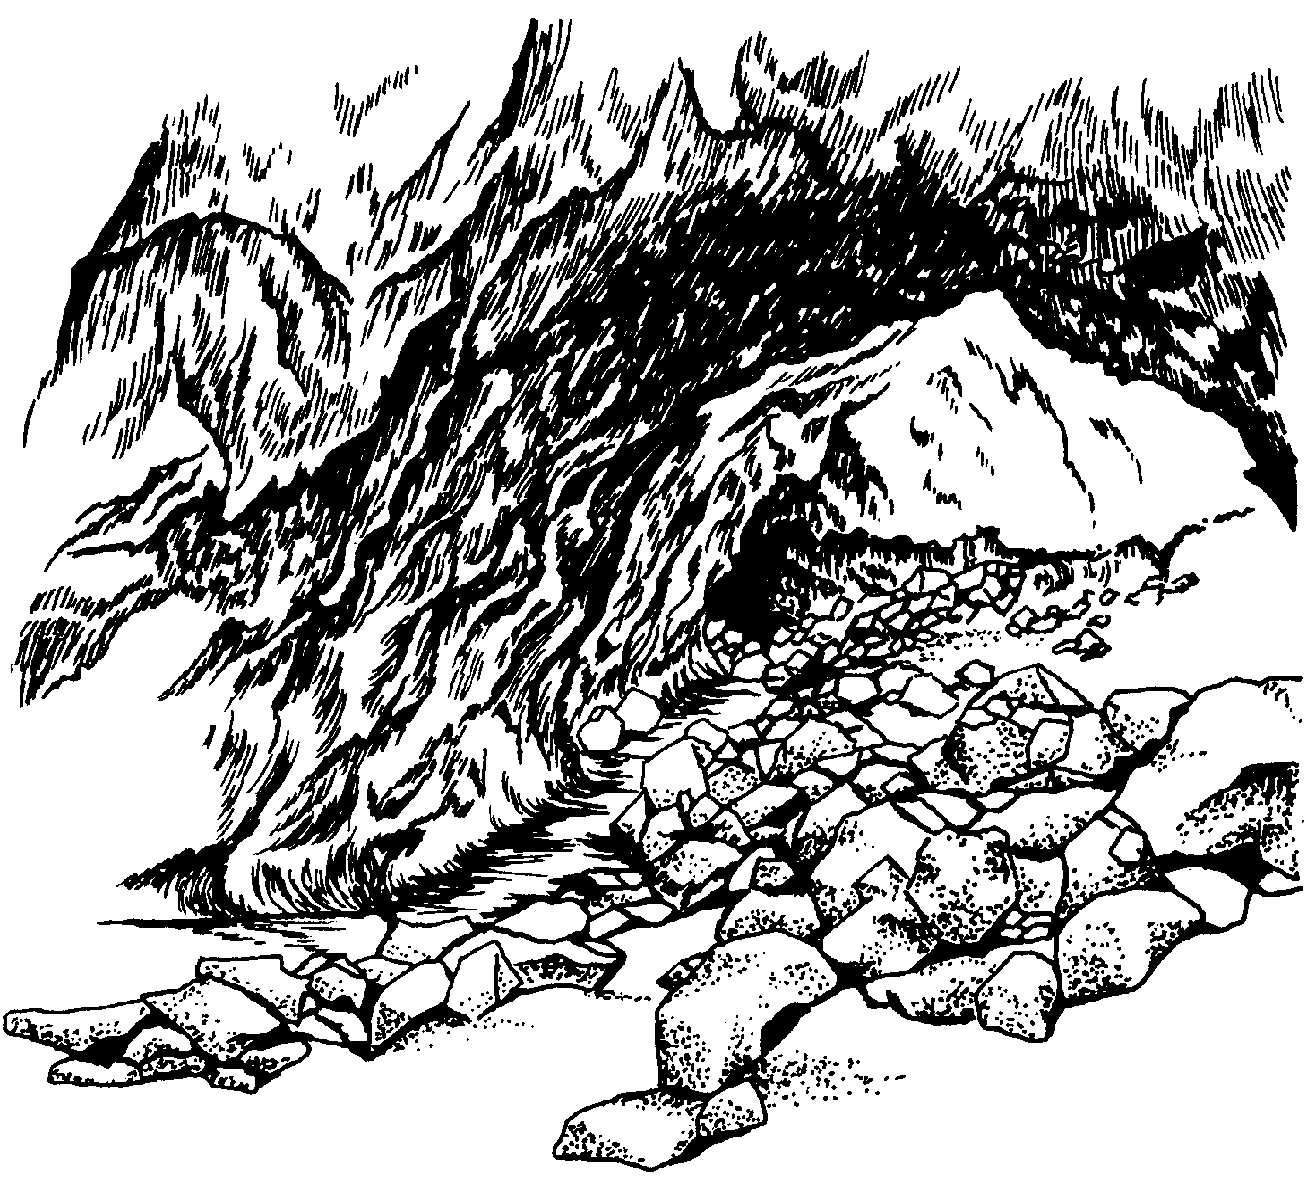 a black and white illustration of a large cave room with piles of large rocks and a small path along the left side